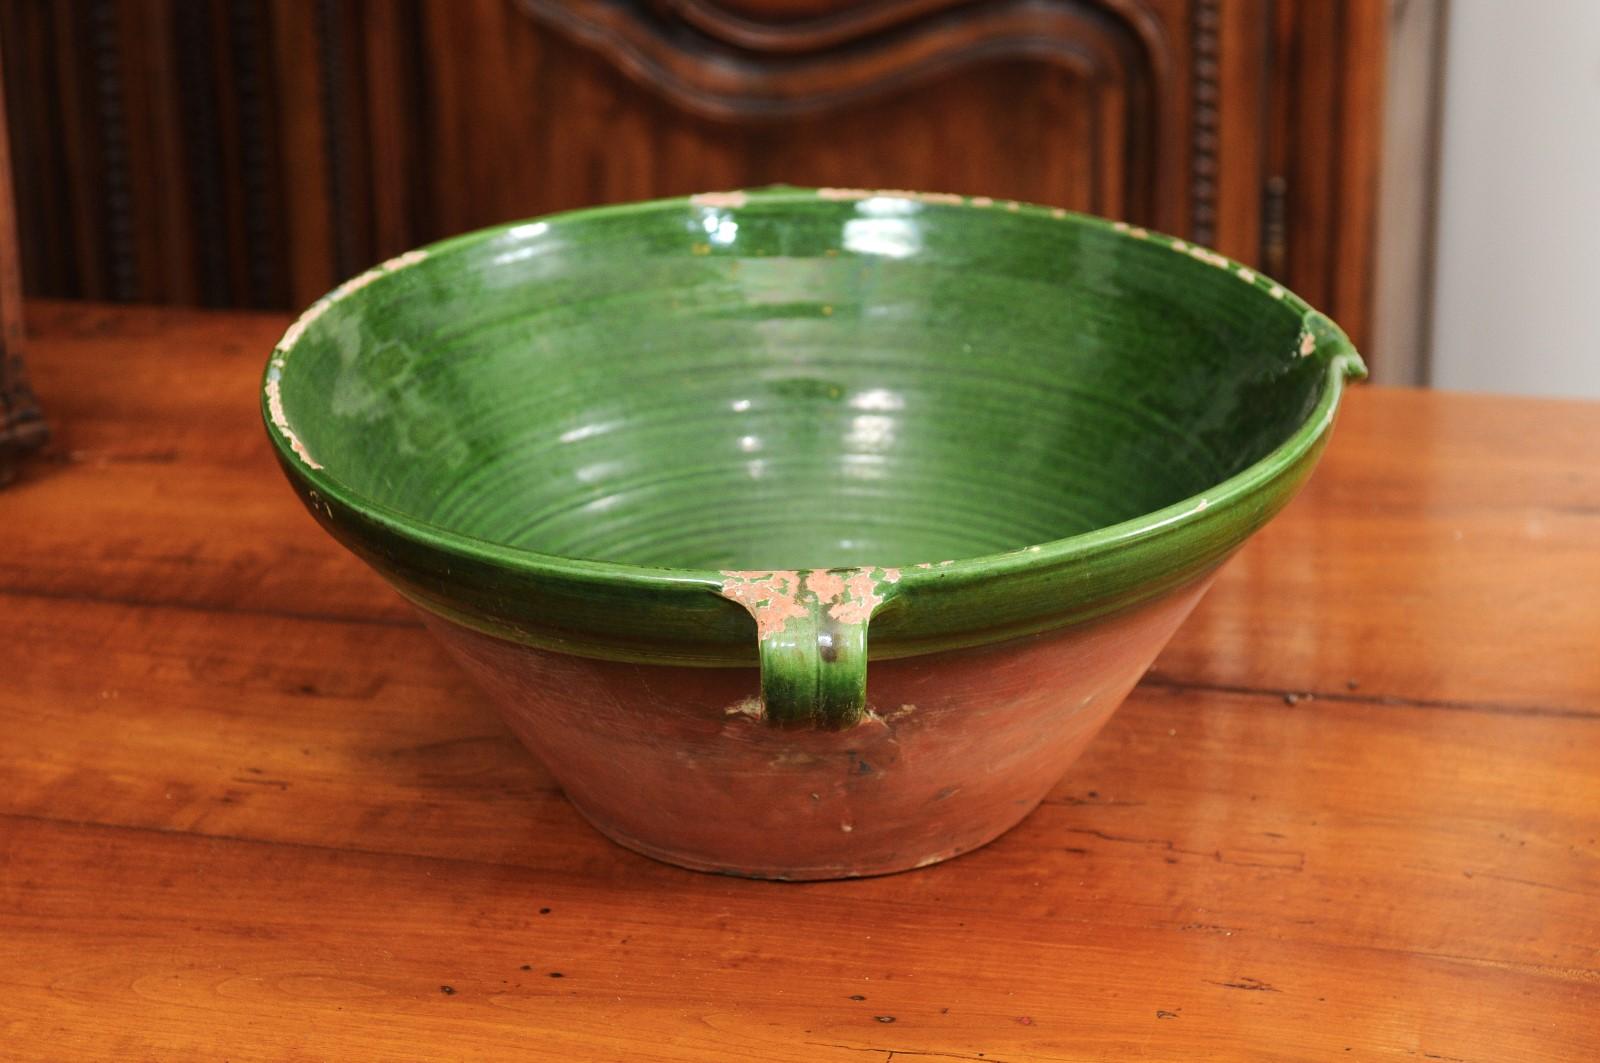 French Provincial French 1850s Provincial Green Glazed Terracotta Bowl with Handles and Spout